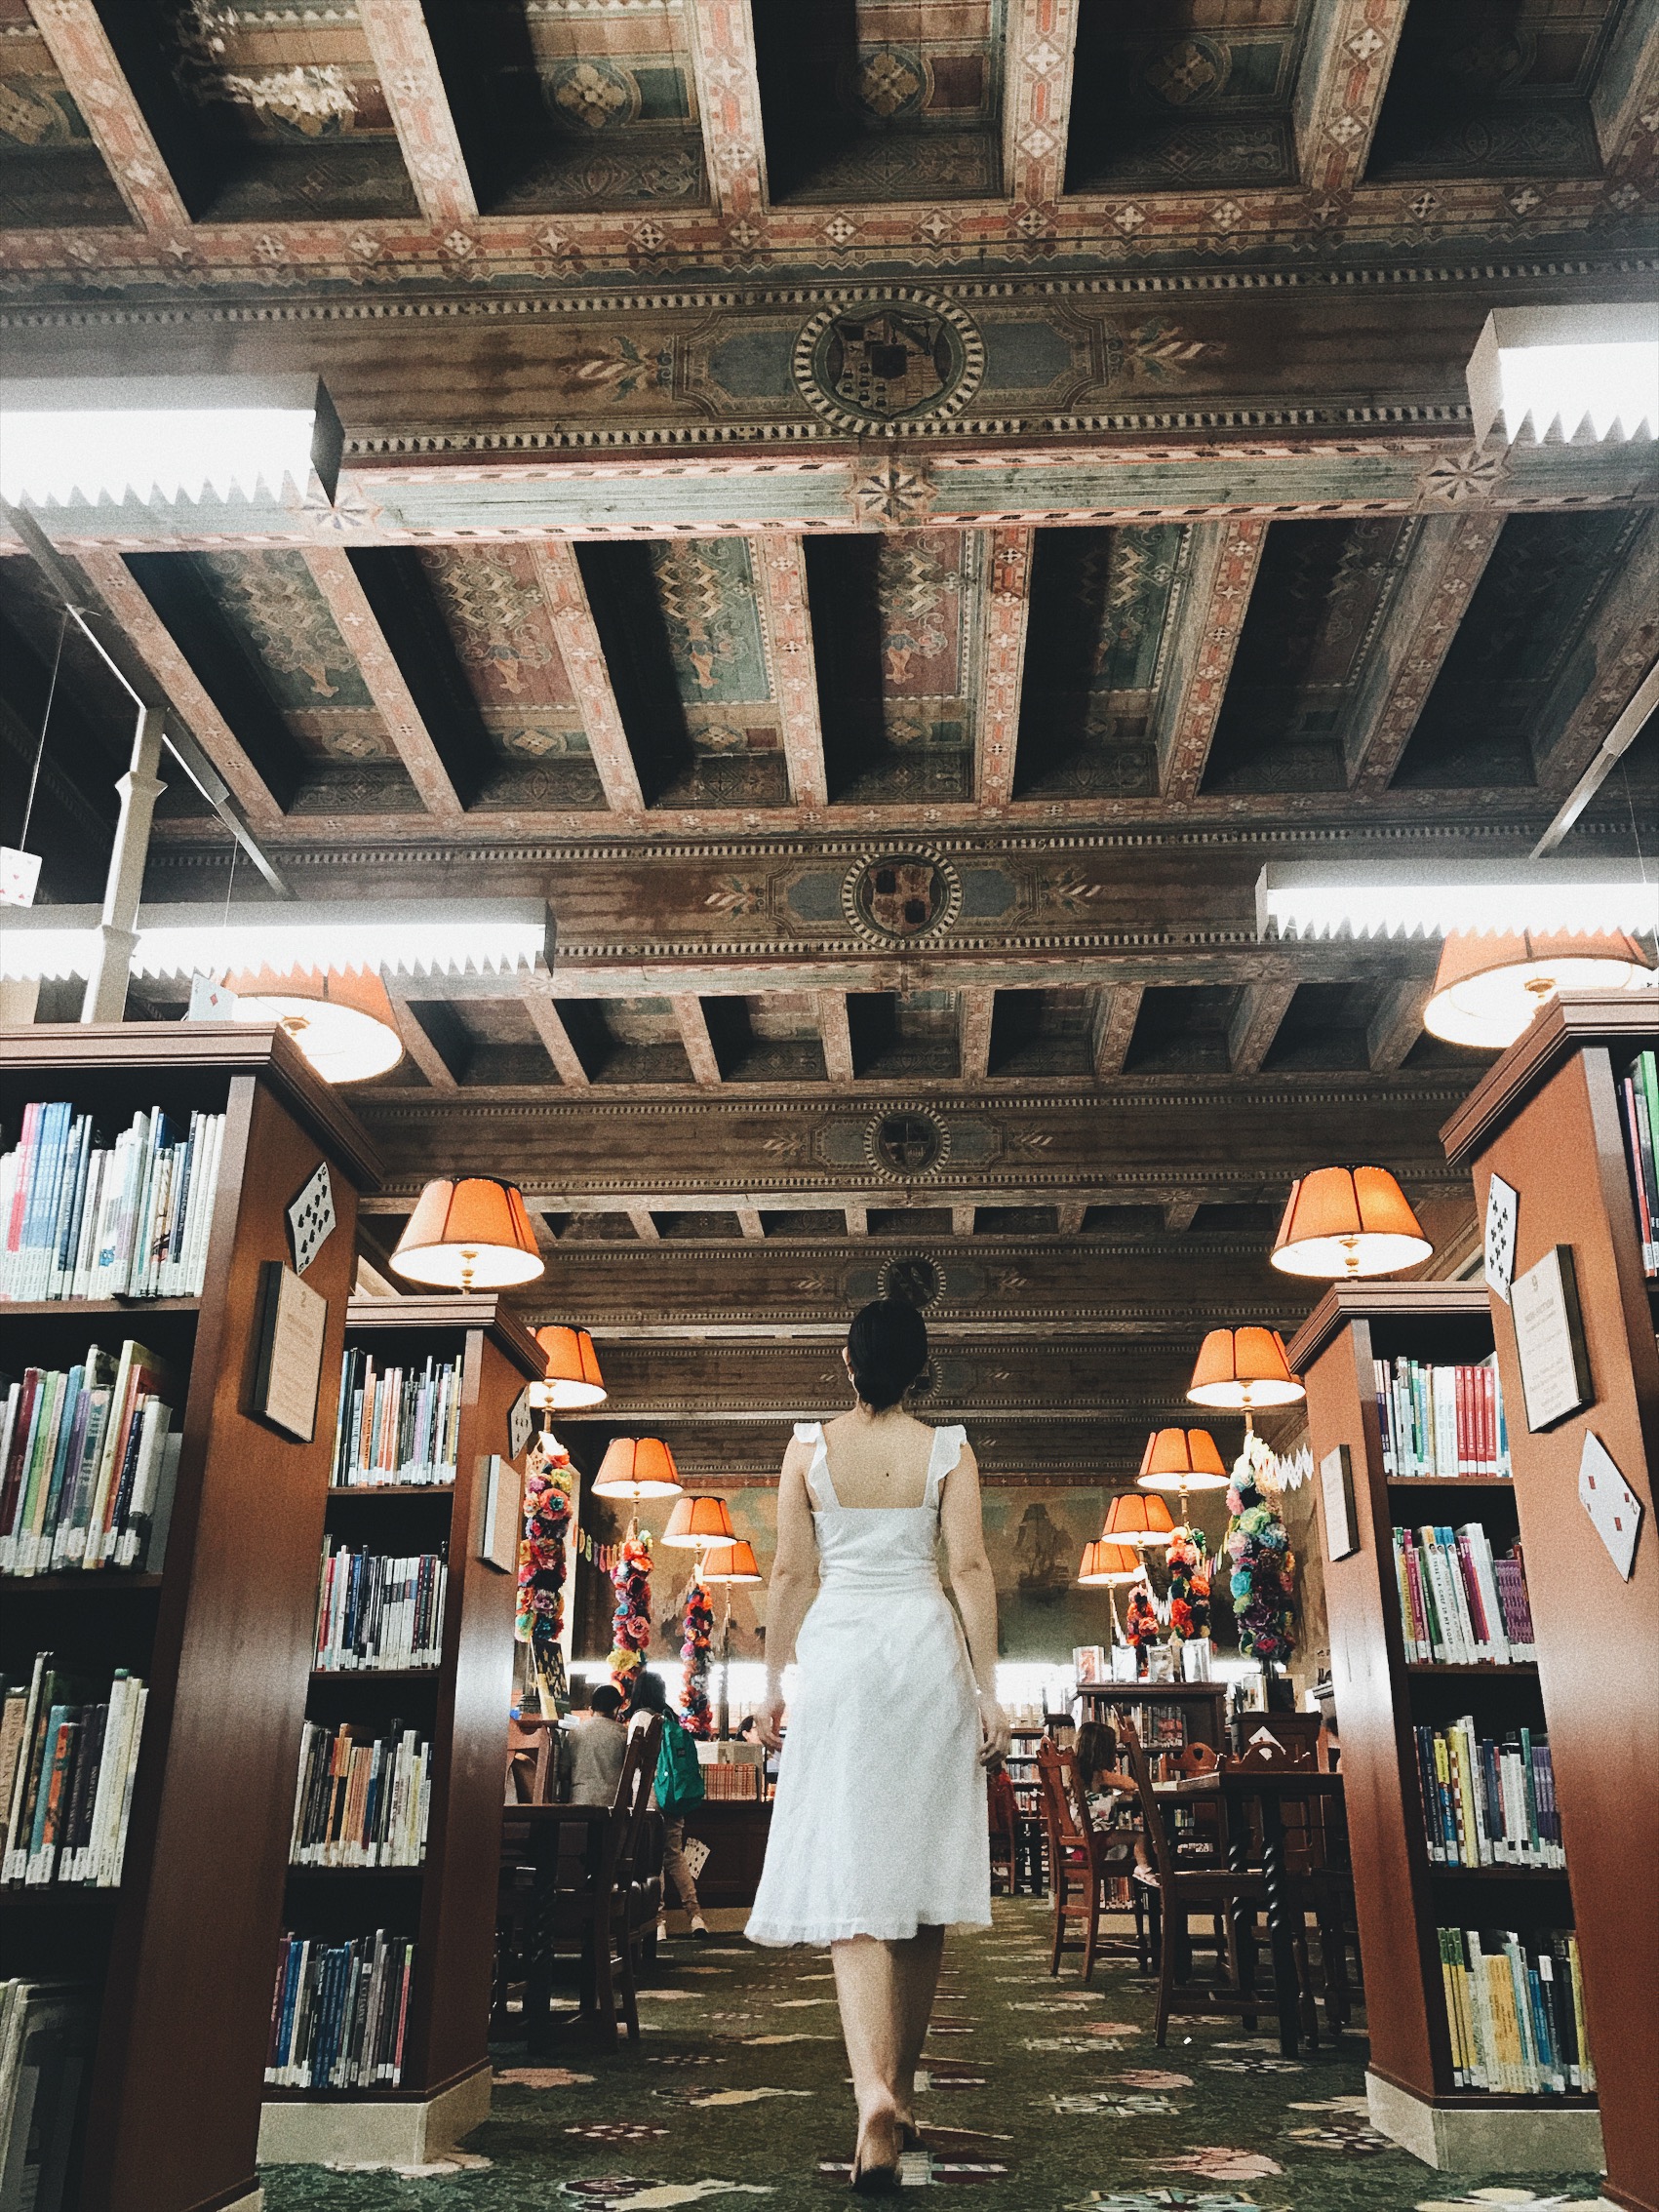 fashion blogger, style blogger, bibliophile, ootd, lookbook, white dress, library, top libraries, books, bookish, Los Angeles, DTLA Los Angeles Central Library, Downtown Los Angeles